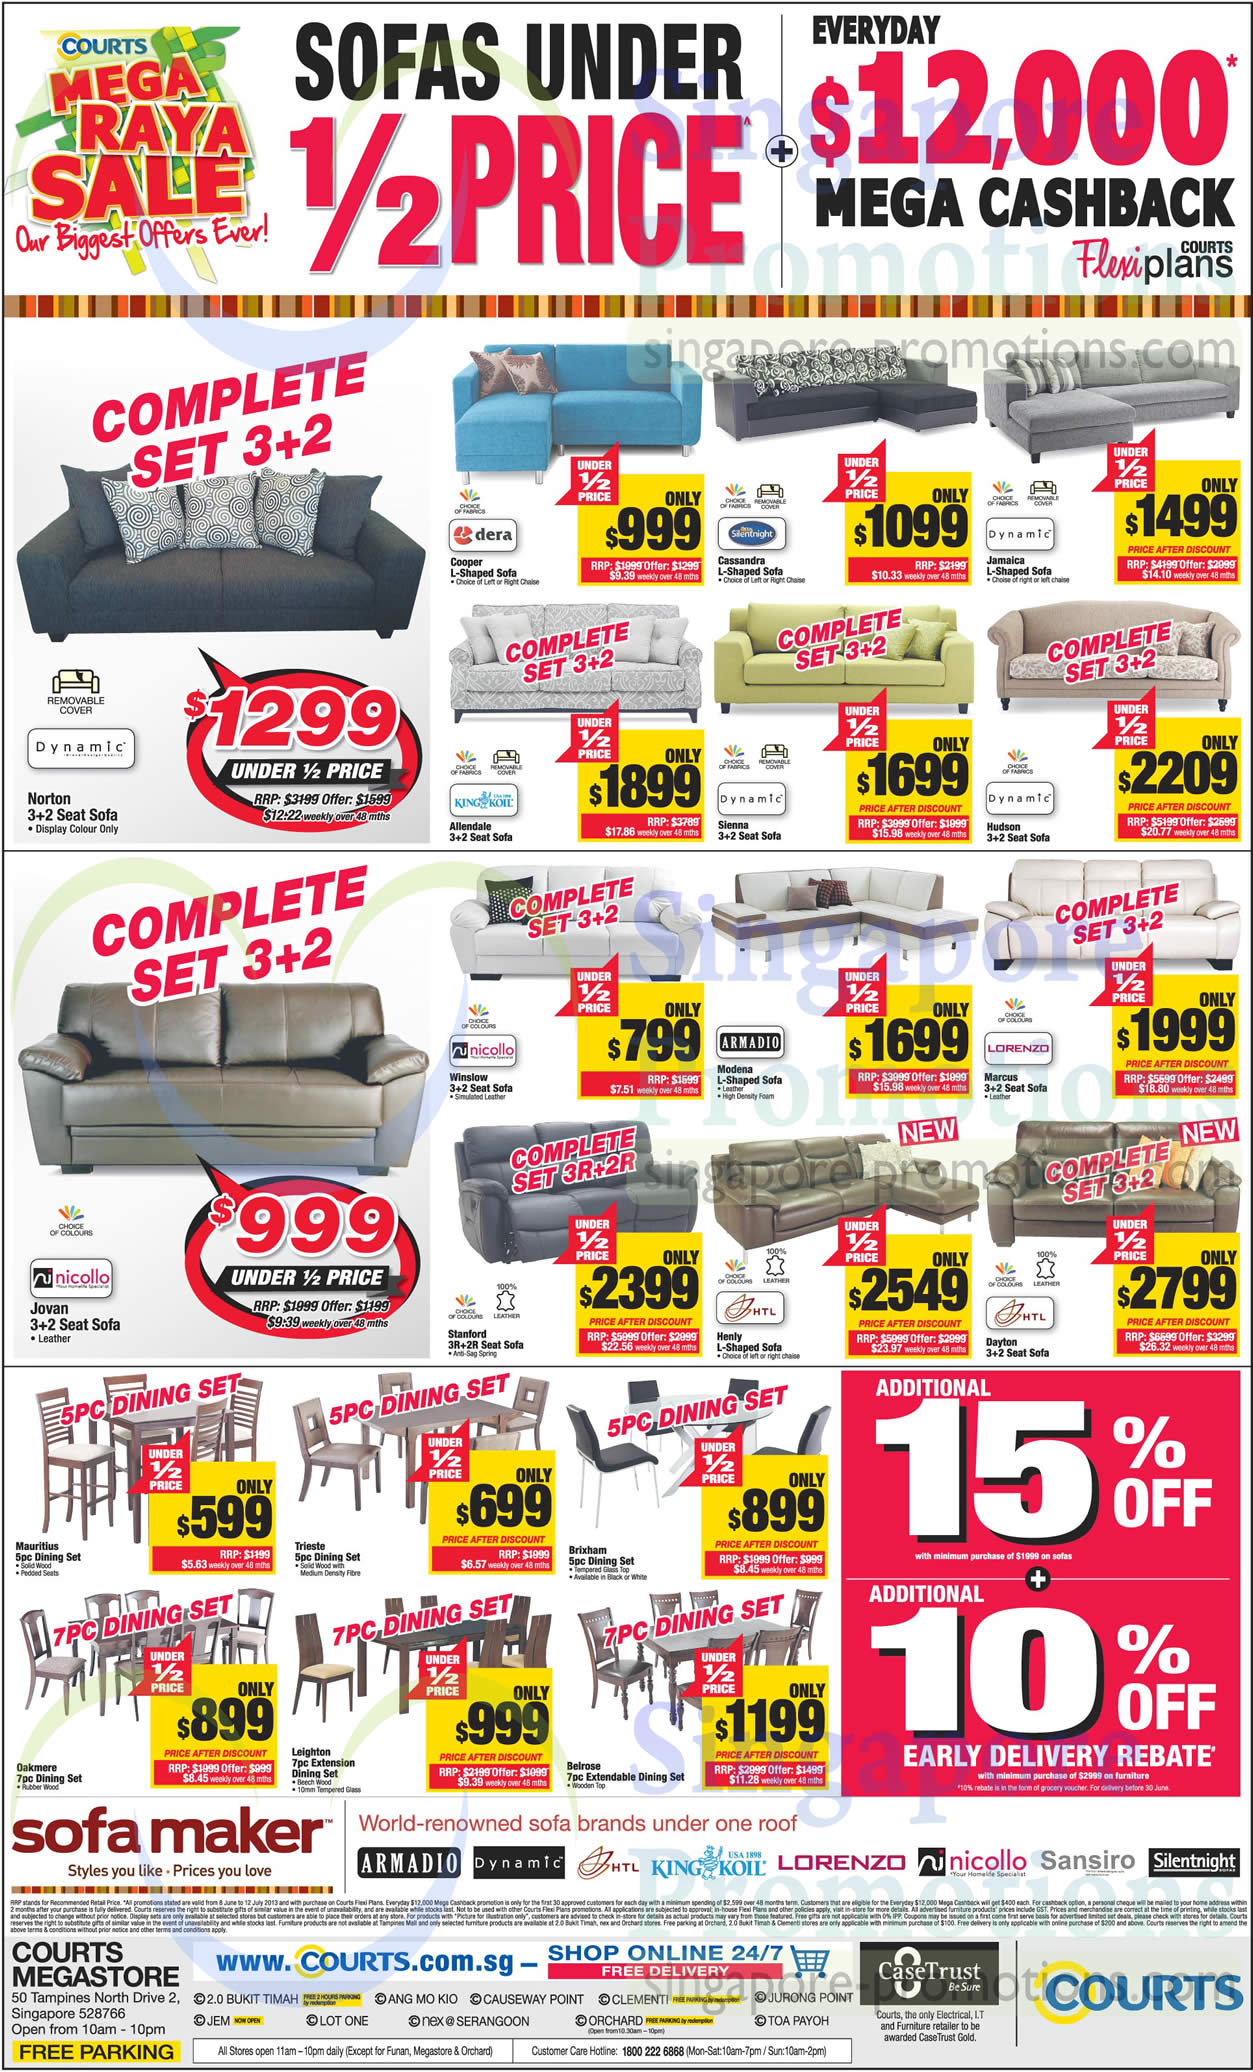 Featured image for Courts Mega Raya Sale Promotion Offers 15 - 16 Jun 2013